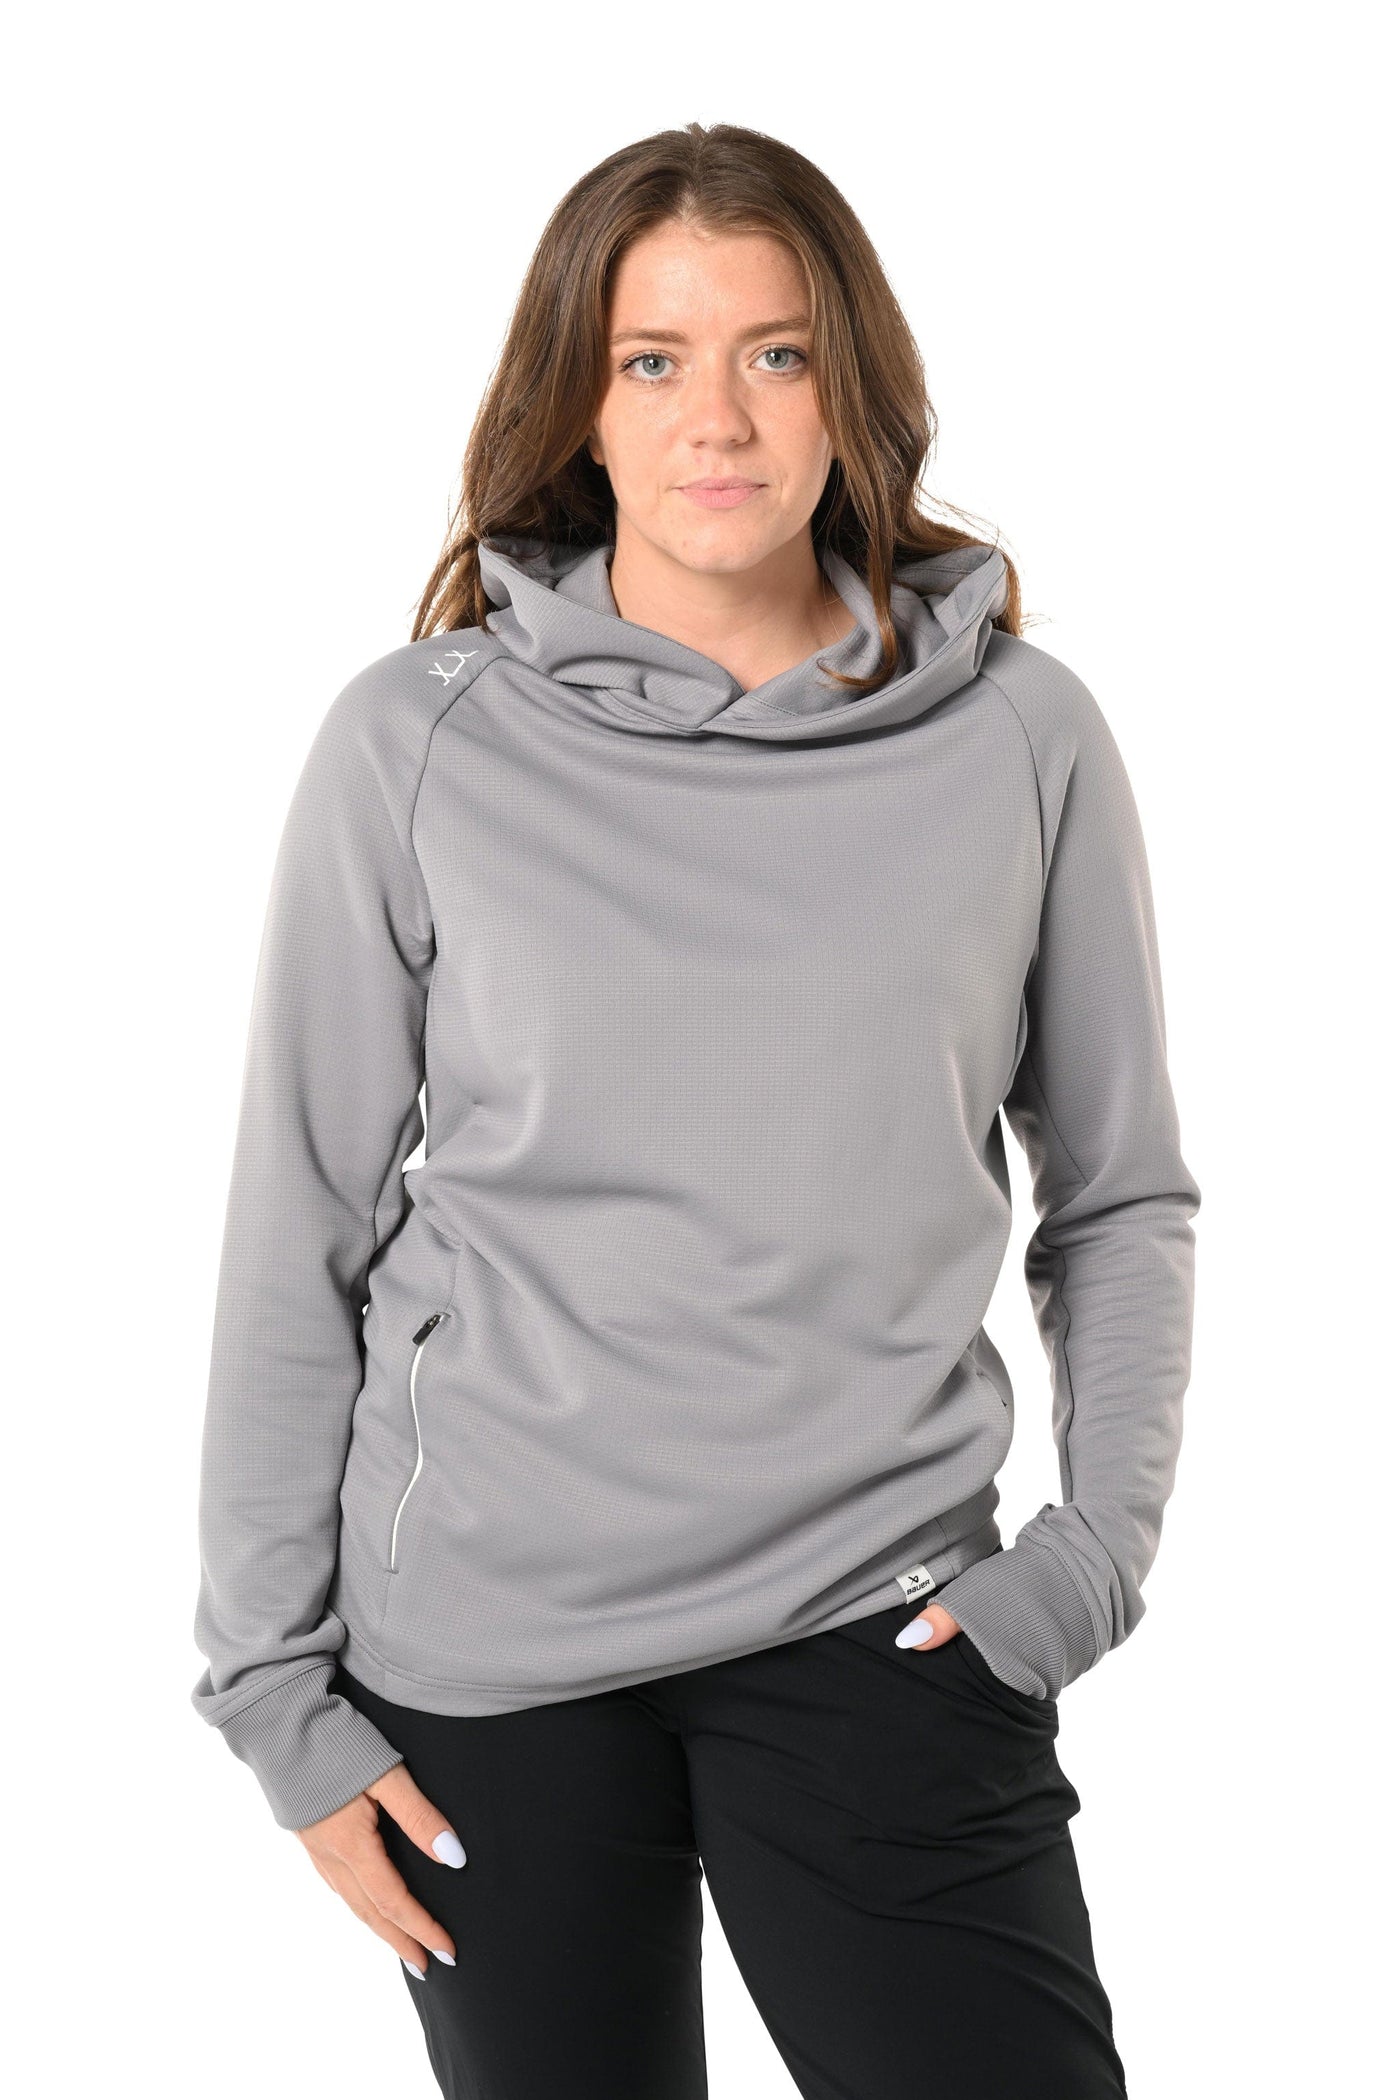 Bauer FLC Mens Hoody - Grey - The Hockey Shop Source For Sports